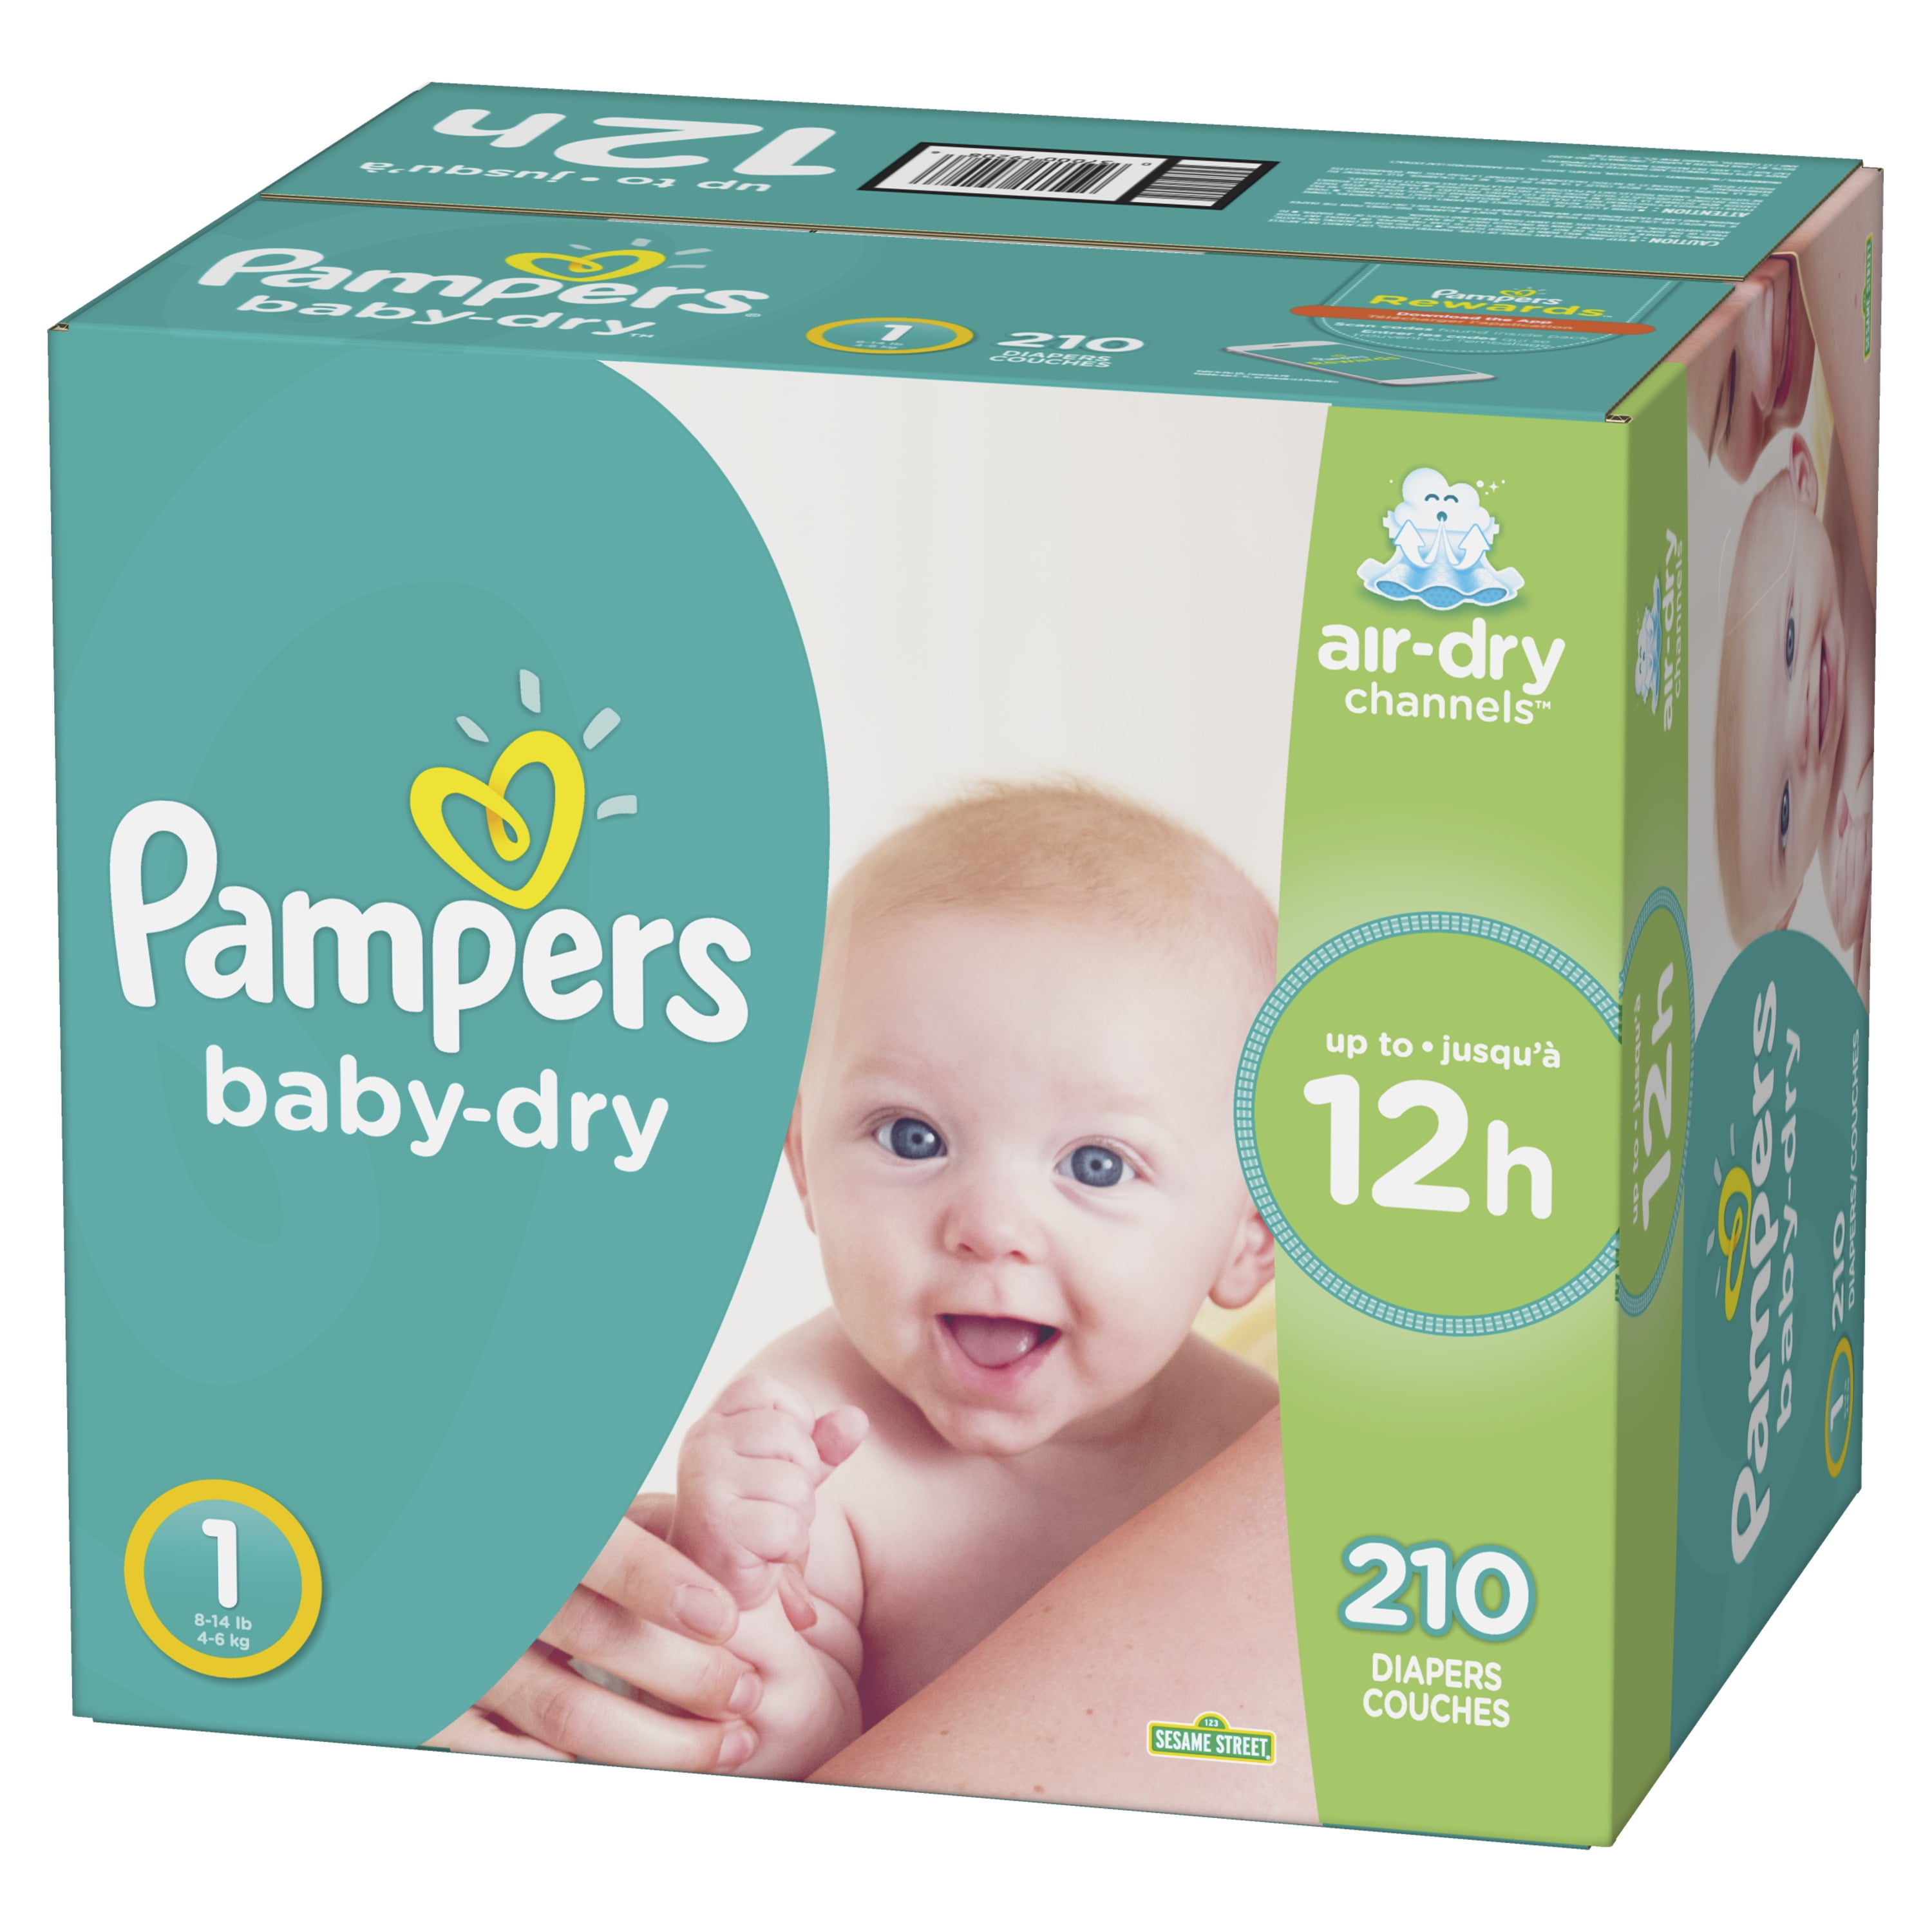 PAMPERS 6430650 à 12,42 € - Pampers Couches baby-dry taille 7 Extra Large,  15+ kg